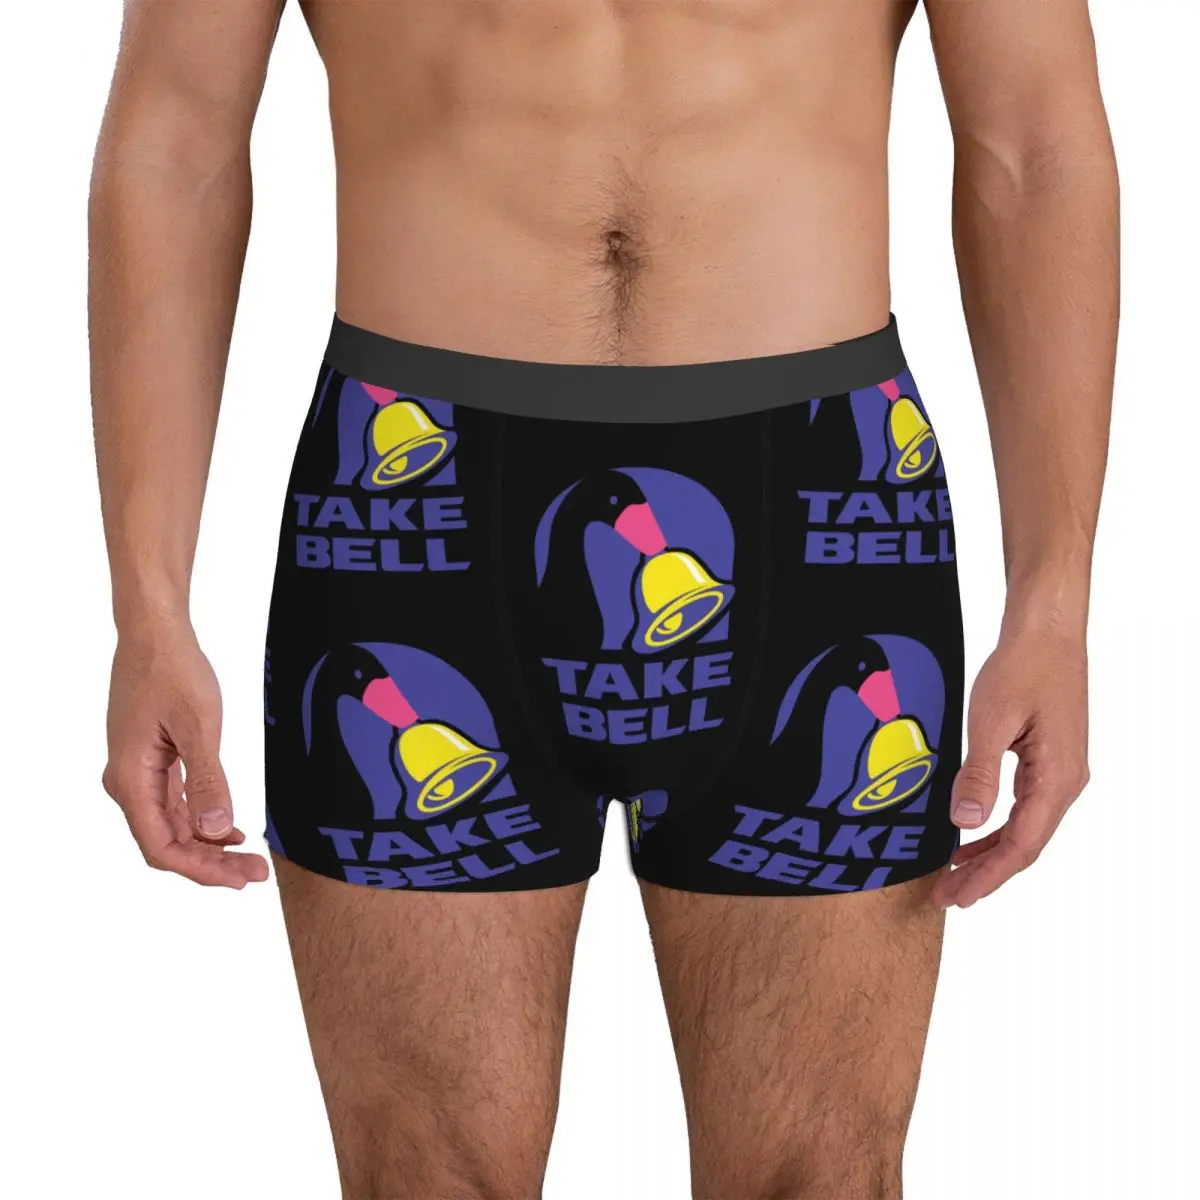 Untitled Goose Game Take Bell Classic Underwear video games funny Plain Underpants Print Shorts Briefs Pouch Men Oversize Trunk